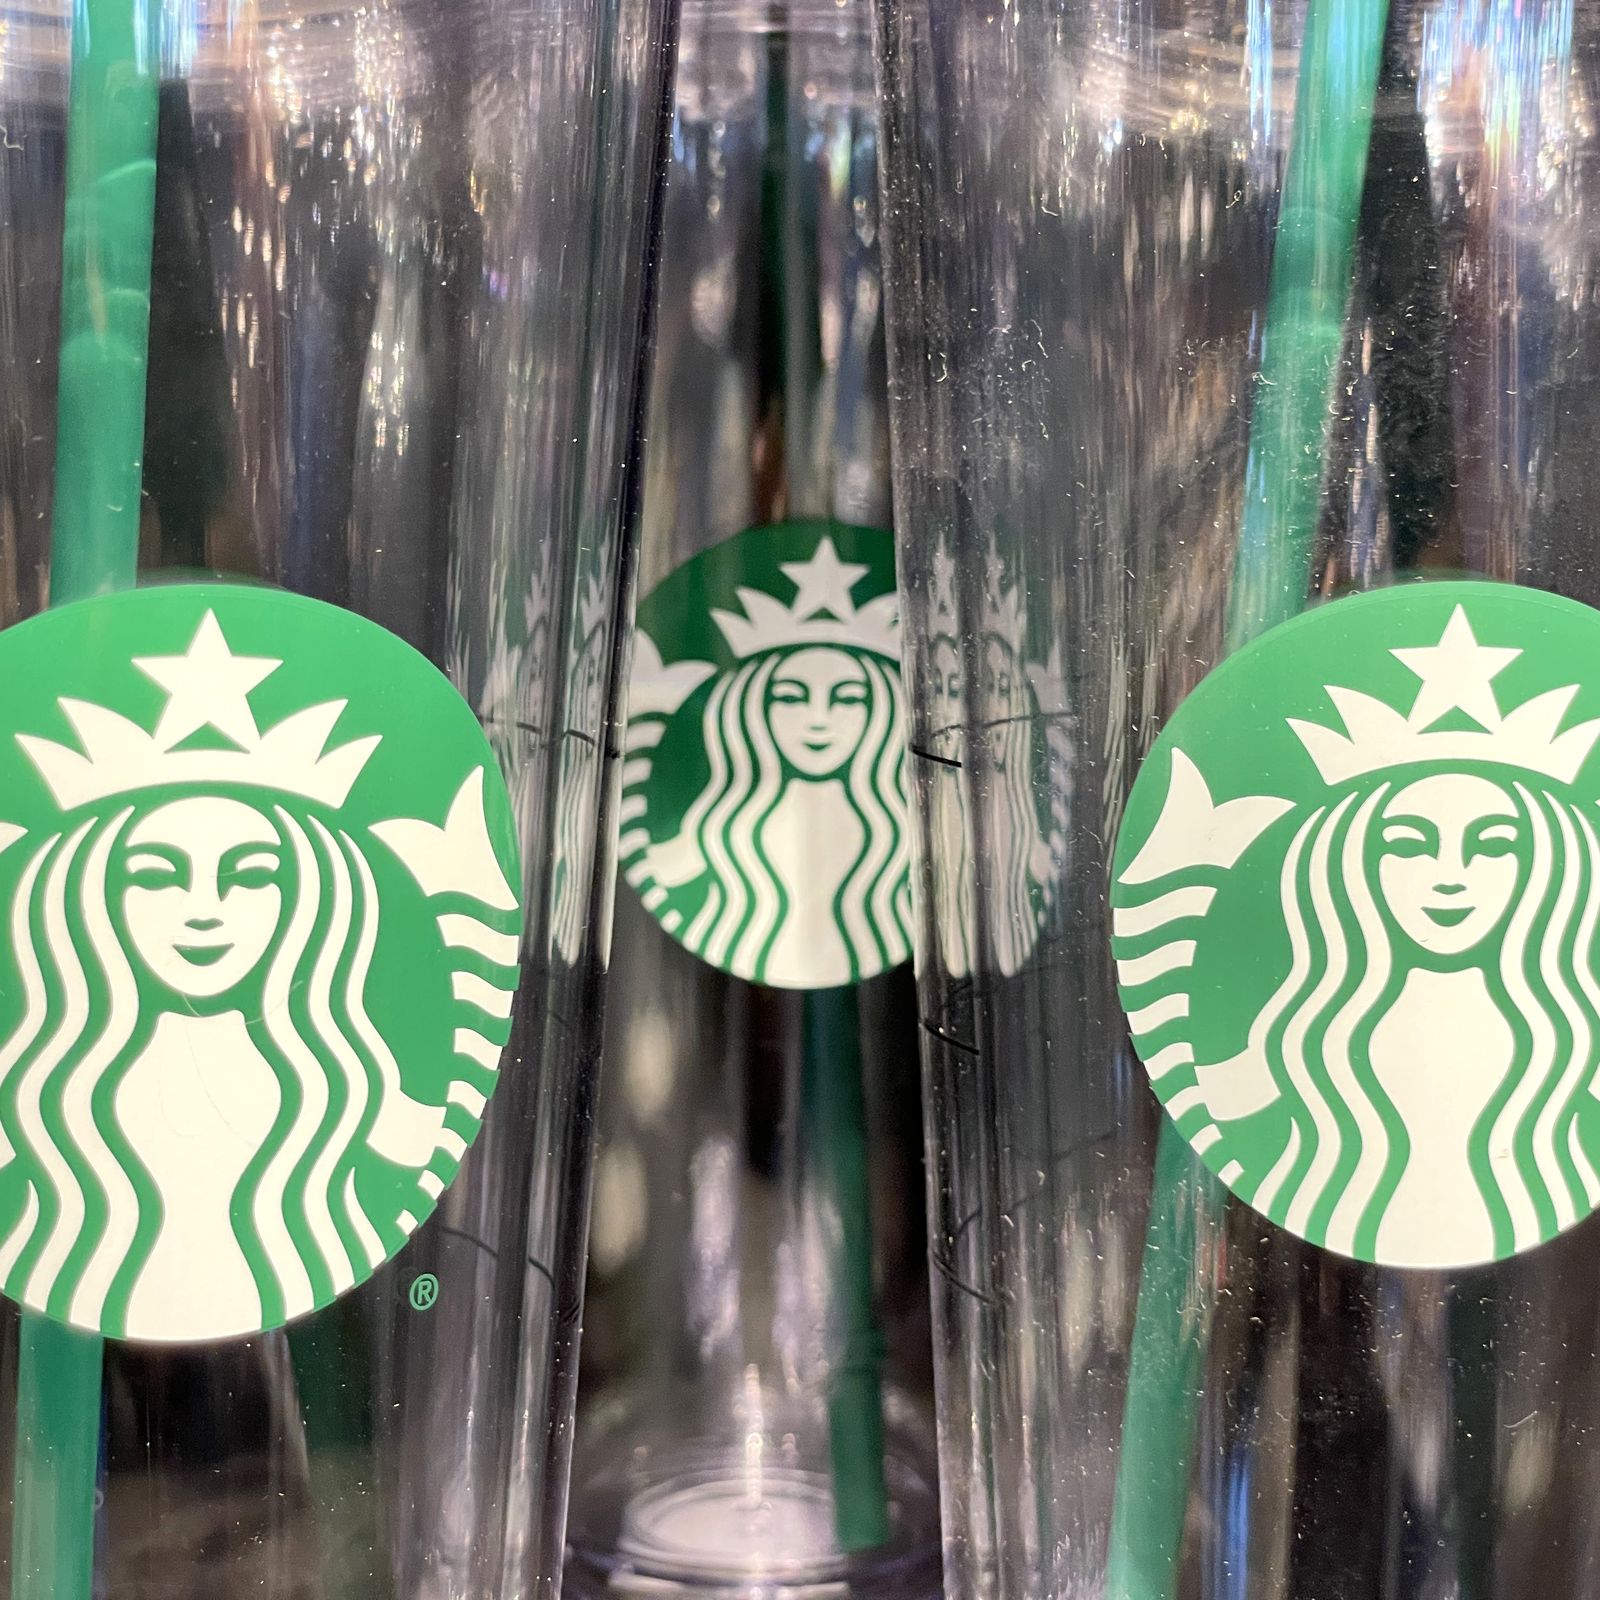 Starbucks orders to be available faster with coffee giant's reinvention plan